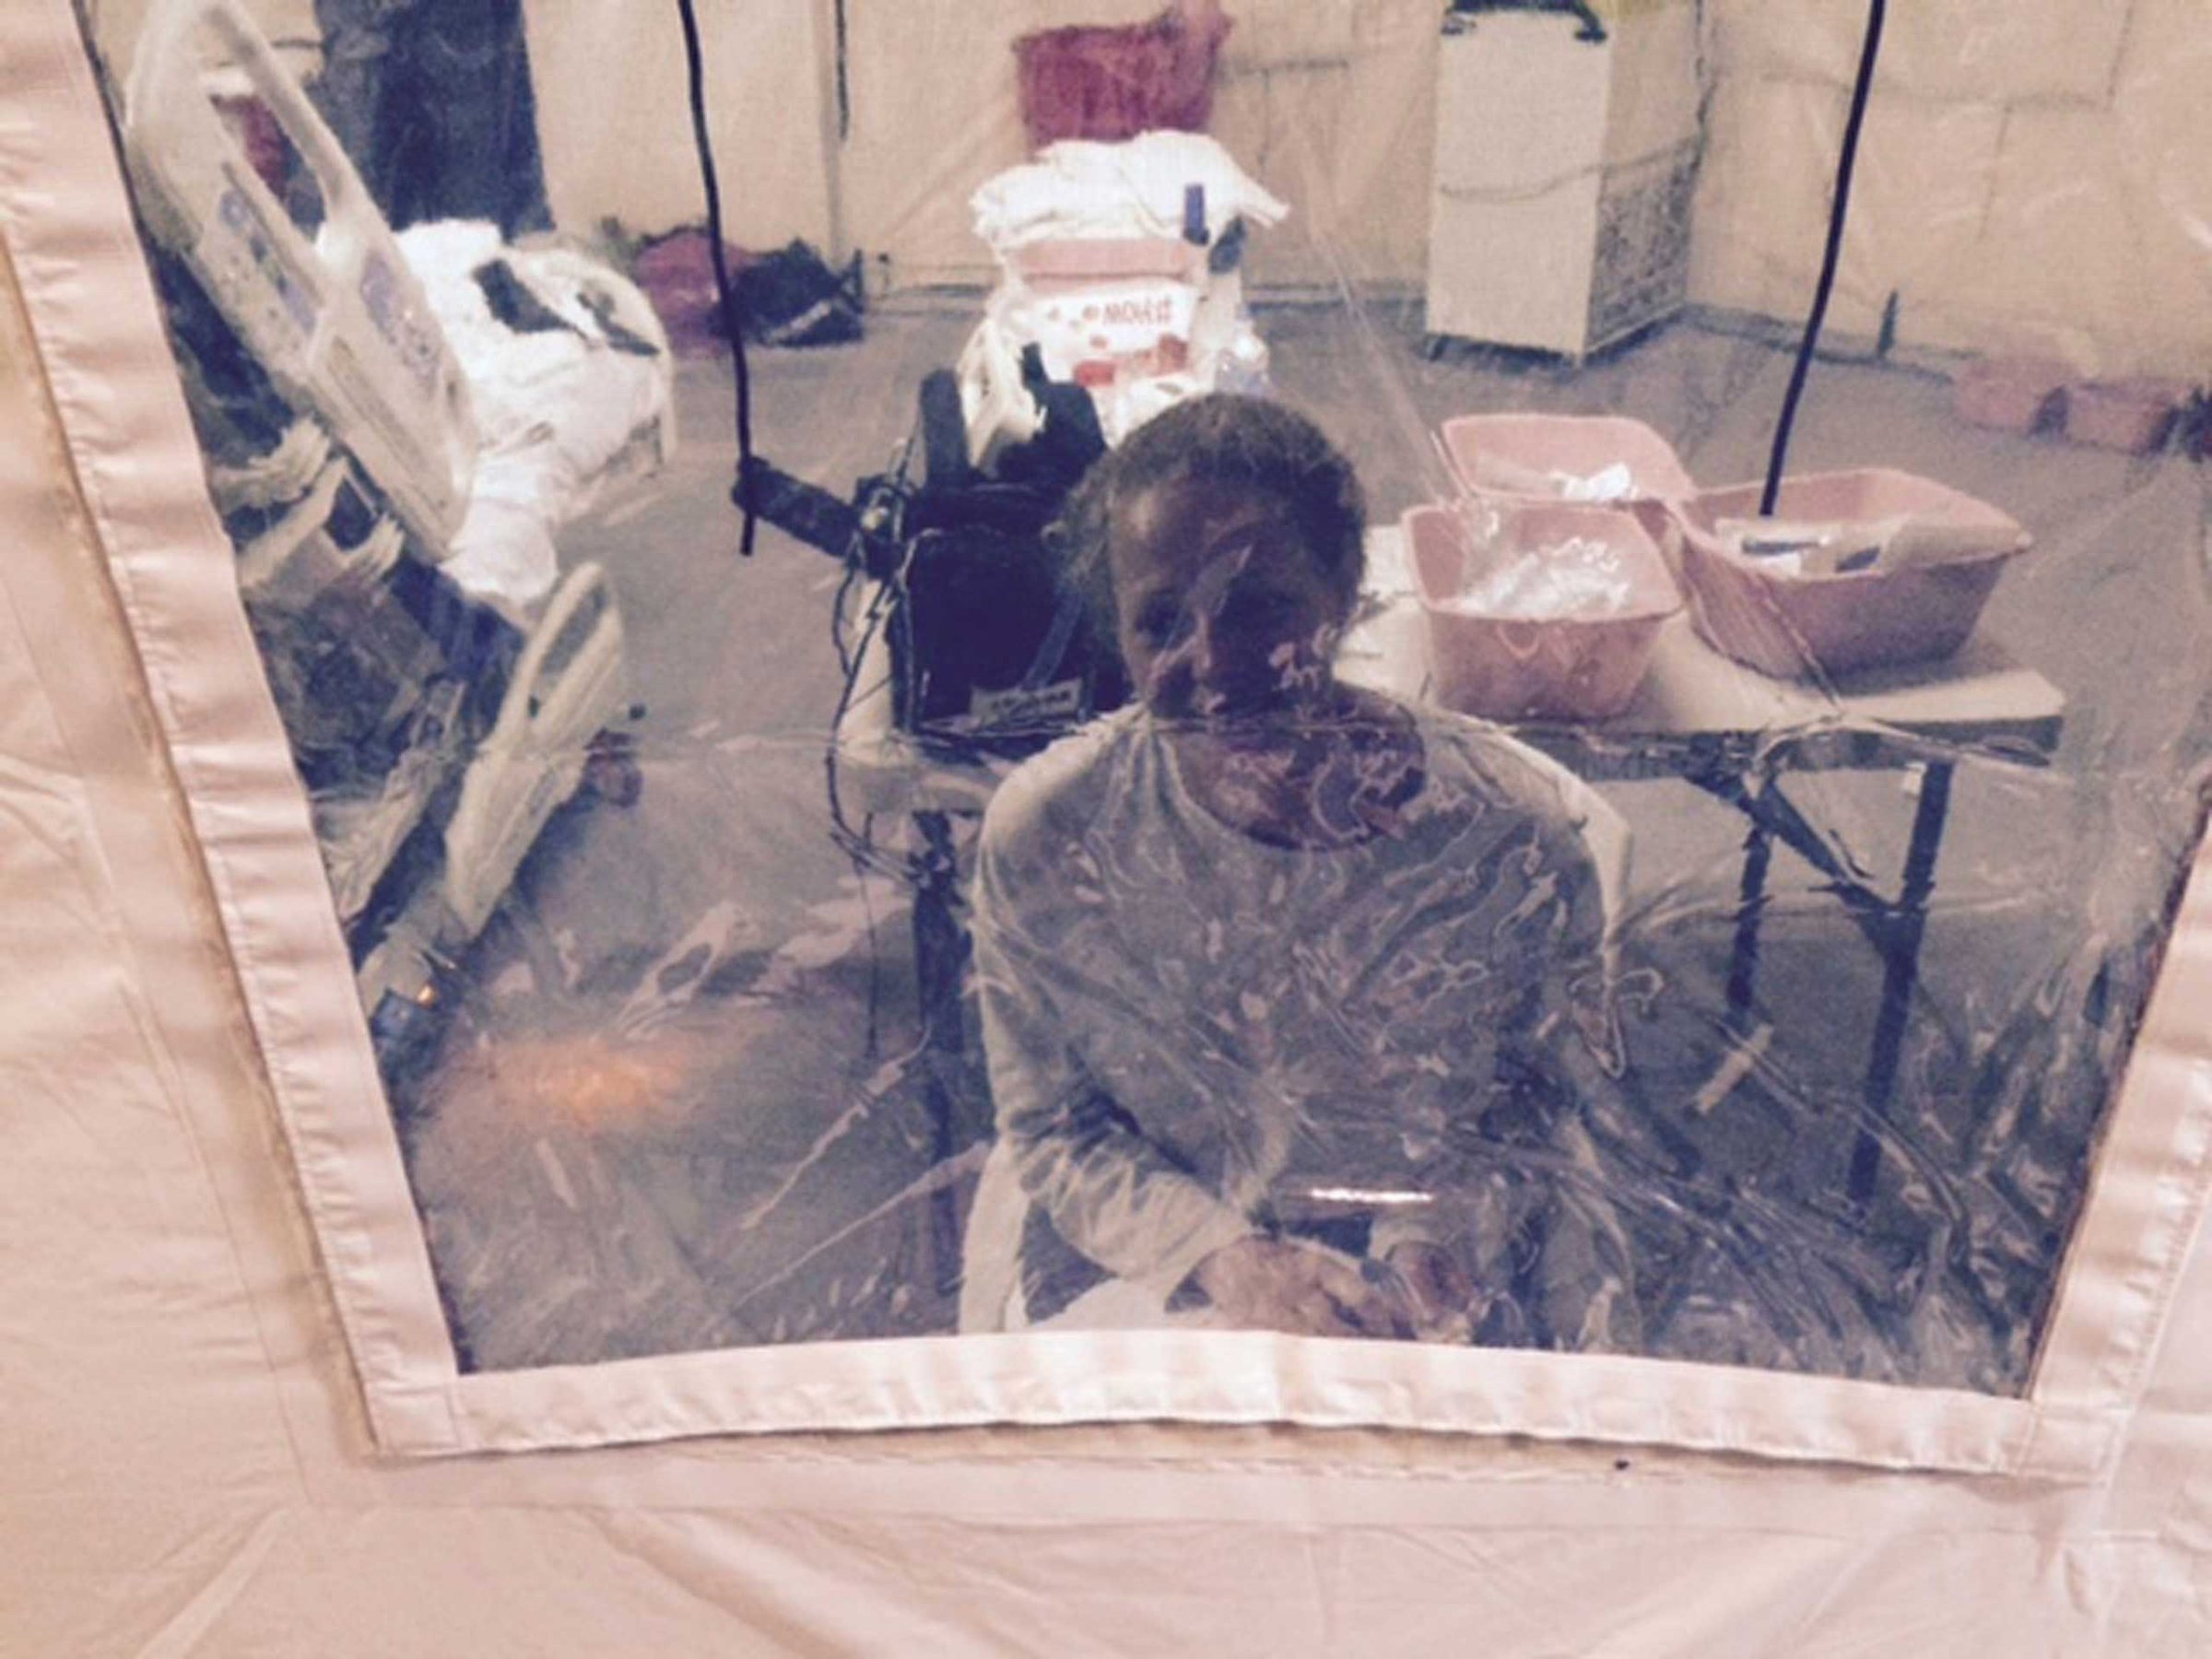 Kaci Hickox, a nurse who arrived in New Jersey on October 24 after treating Ebola patients in West Africa, seen in a hospital quarantine tent in Newark, New Jersey, Oct. 26, 2014.